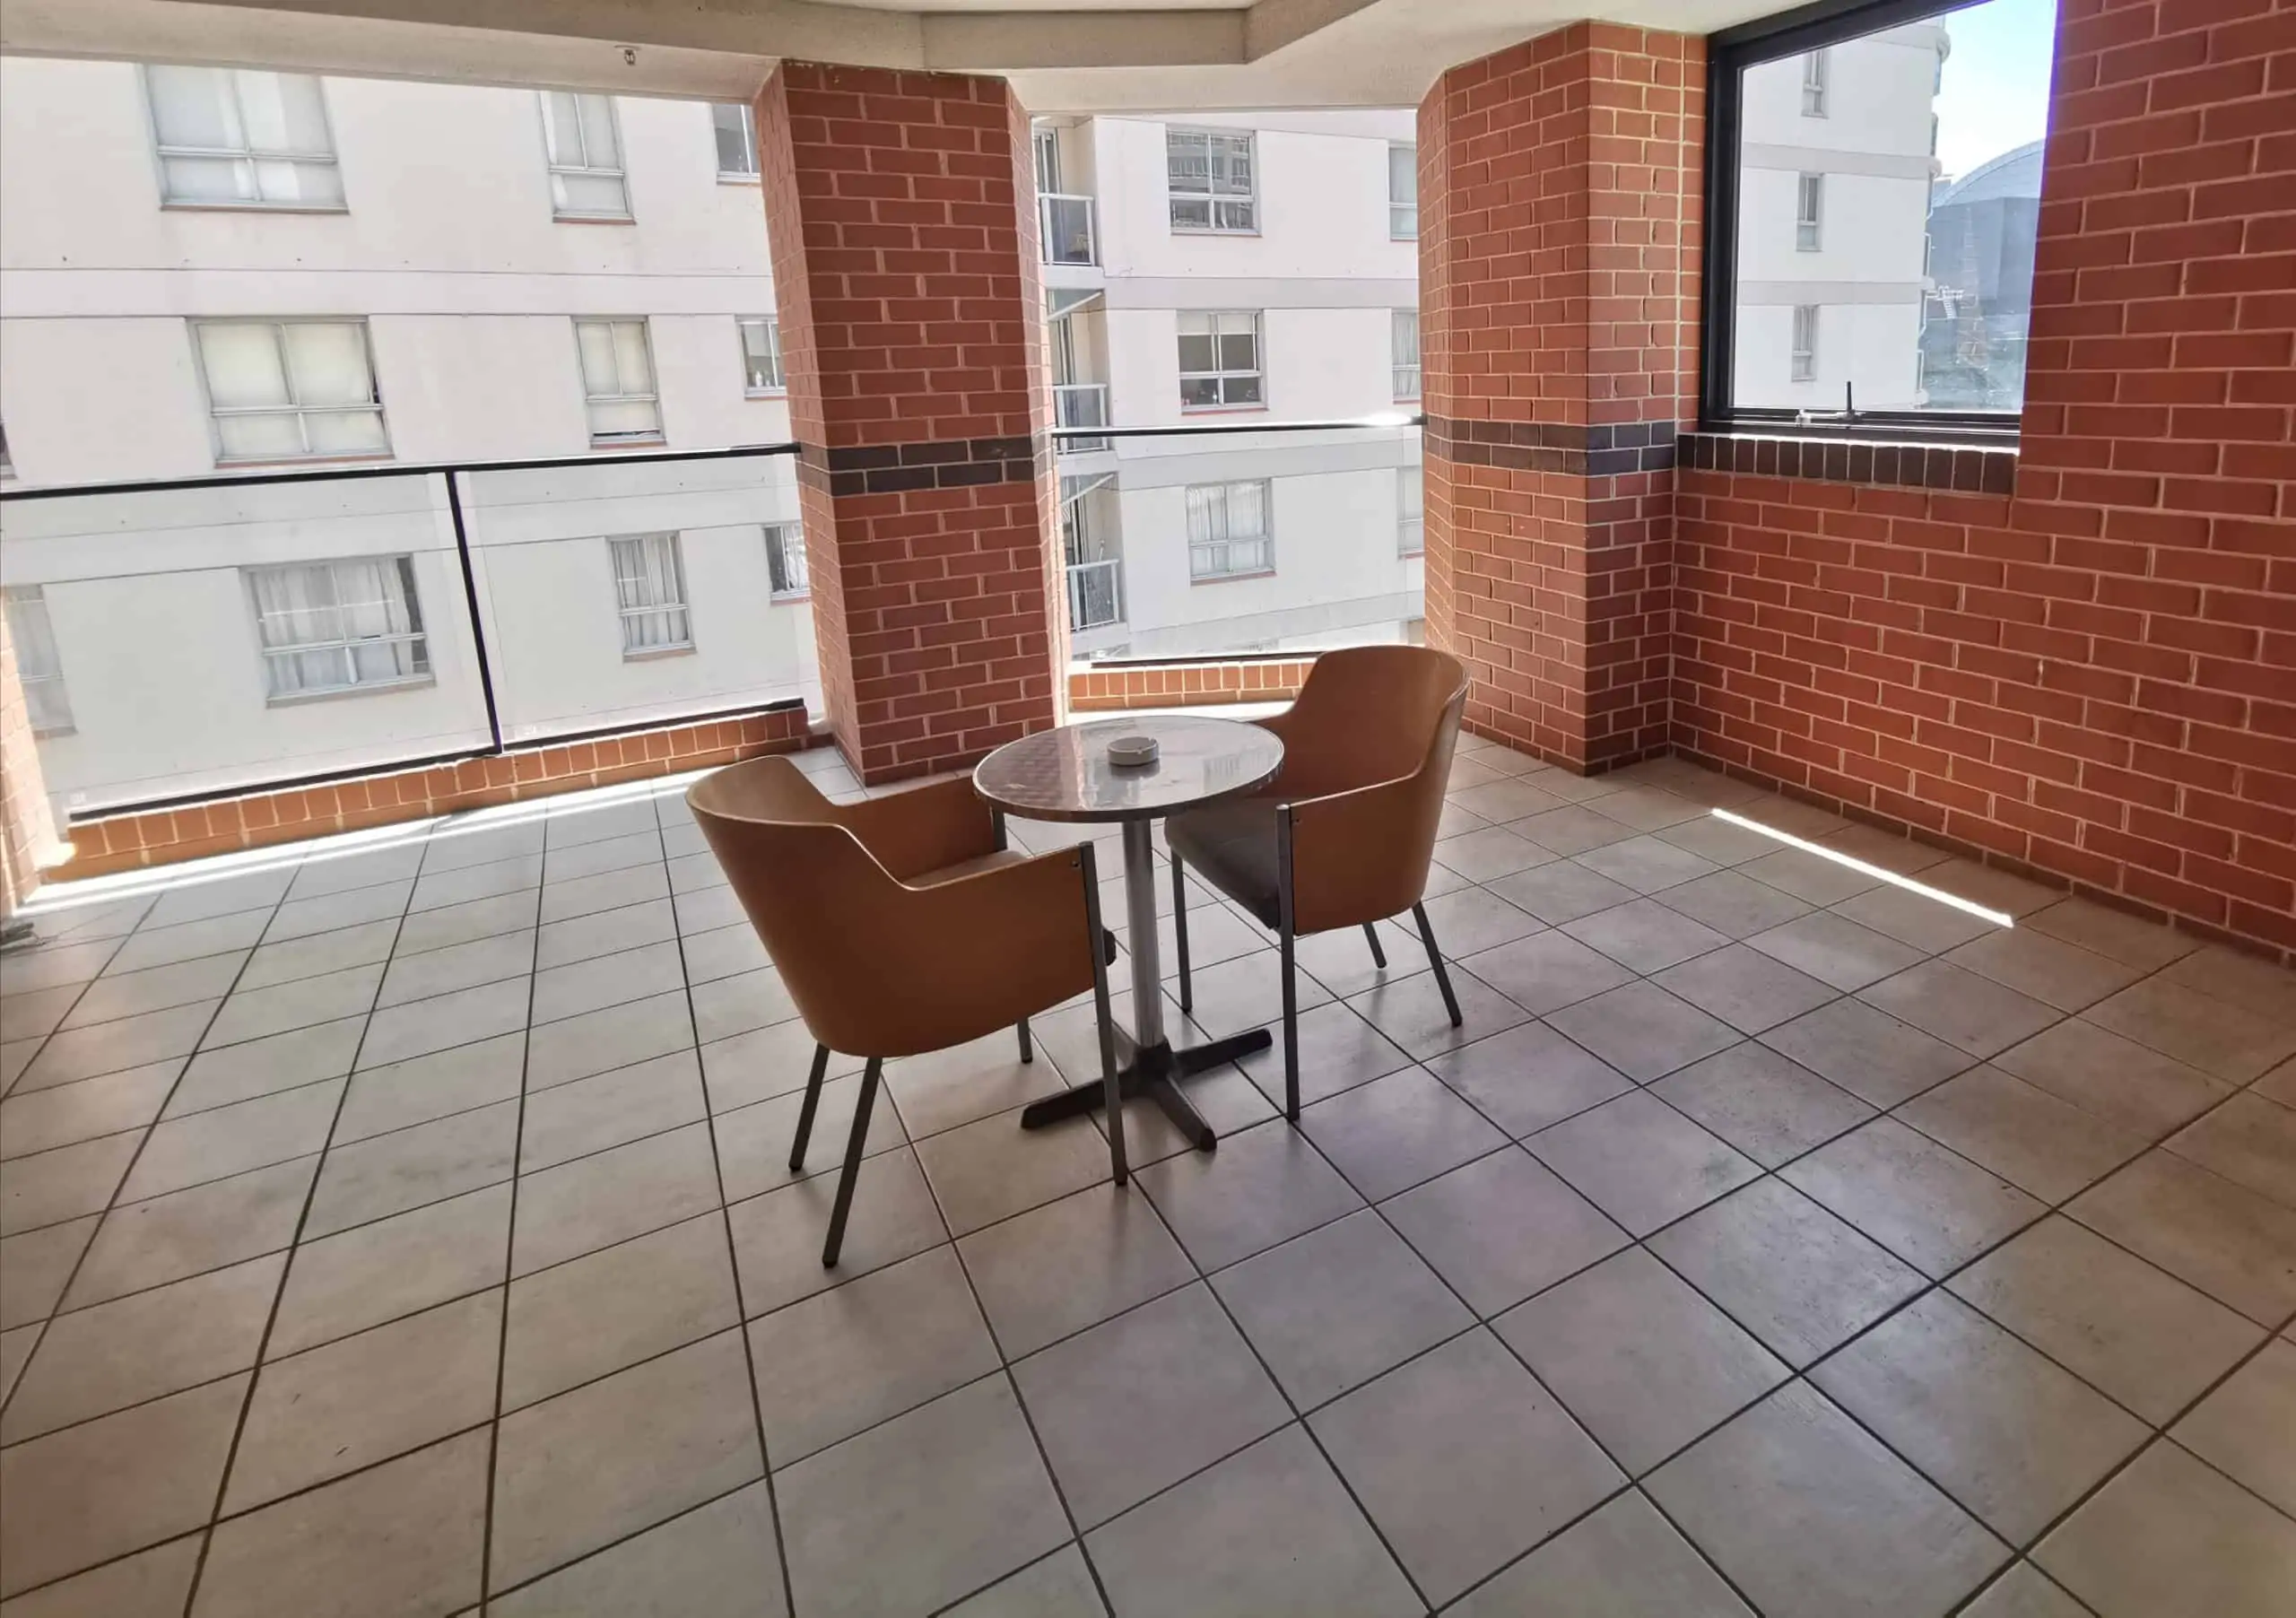 APX Hotels Apartments nice executive studio balcony view in APX Darling Harbour Sydney CBD Australia